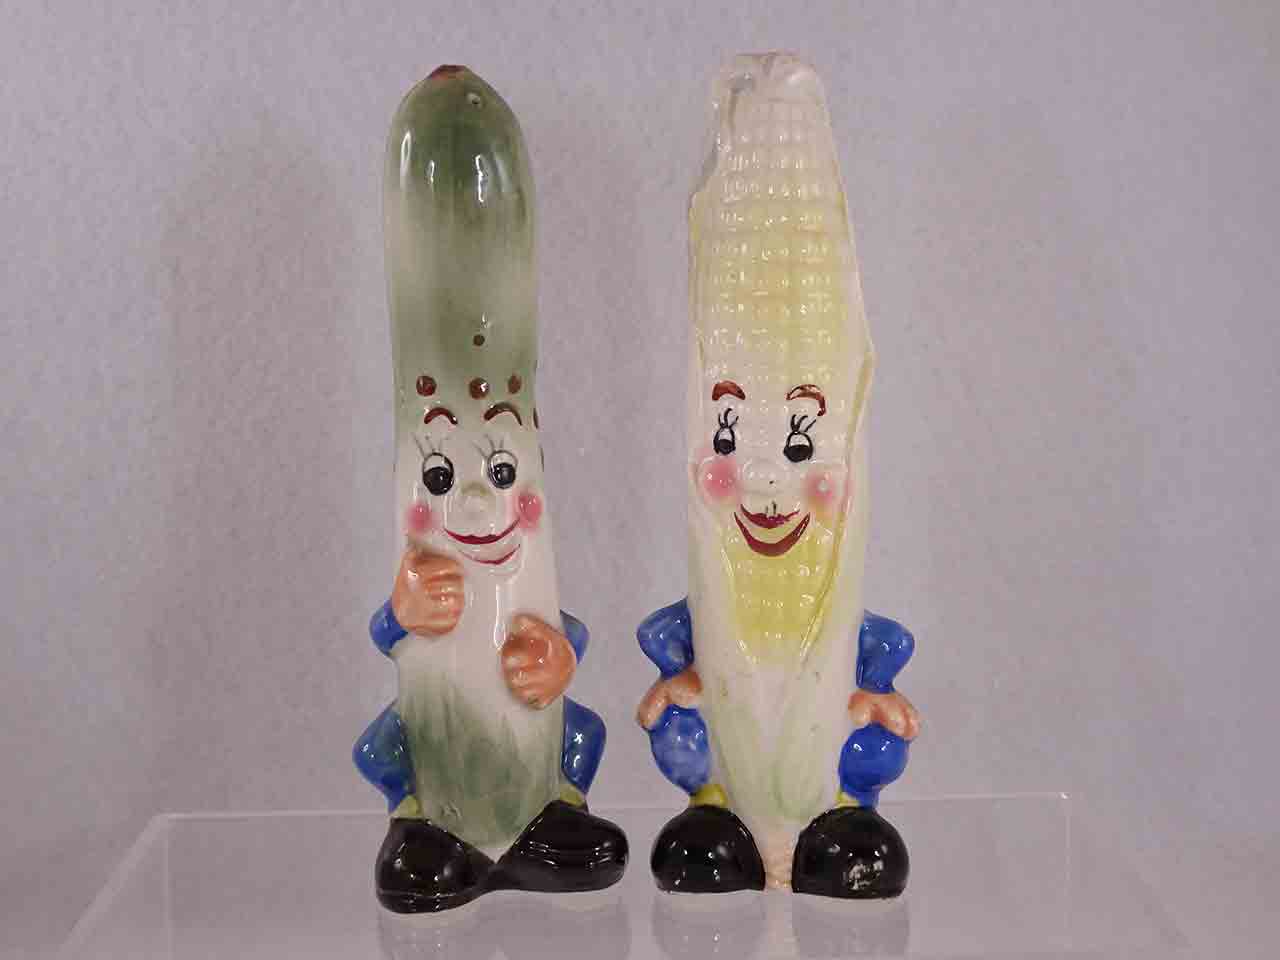 Anthropomorphic tall vegetable salt and pepper shakers - cucumber and corn